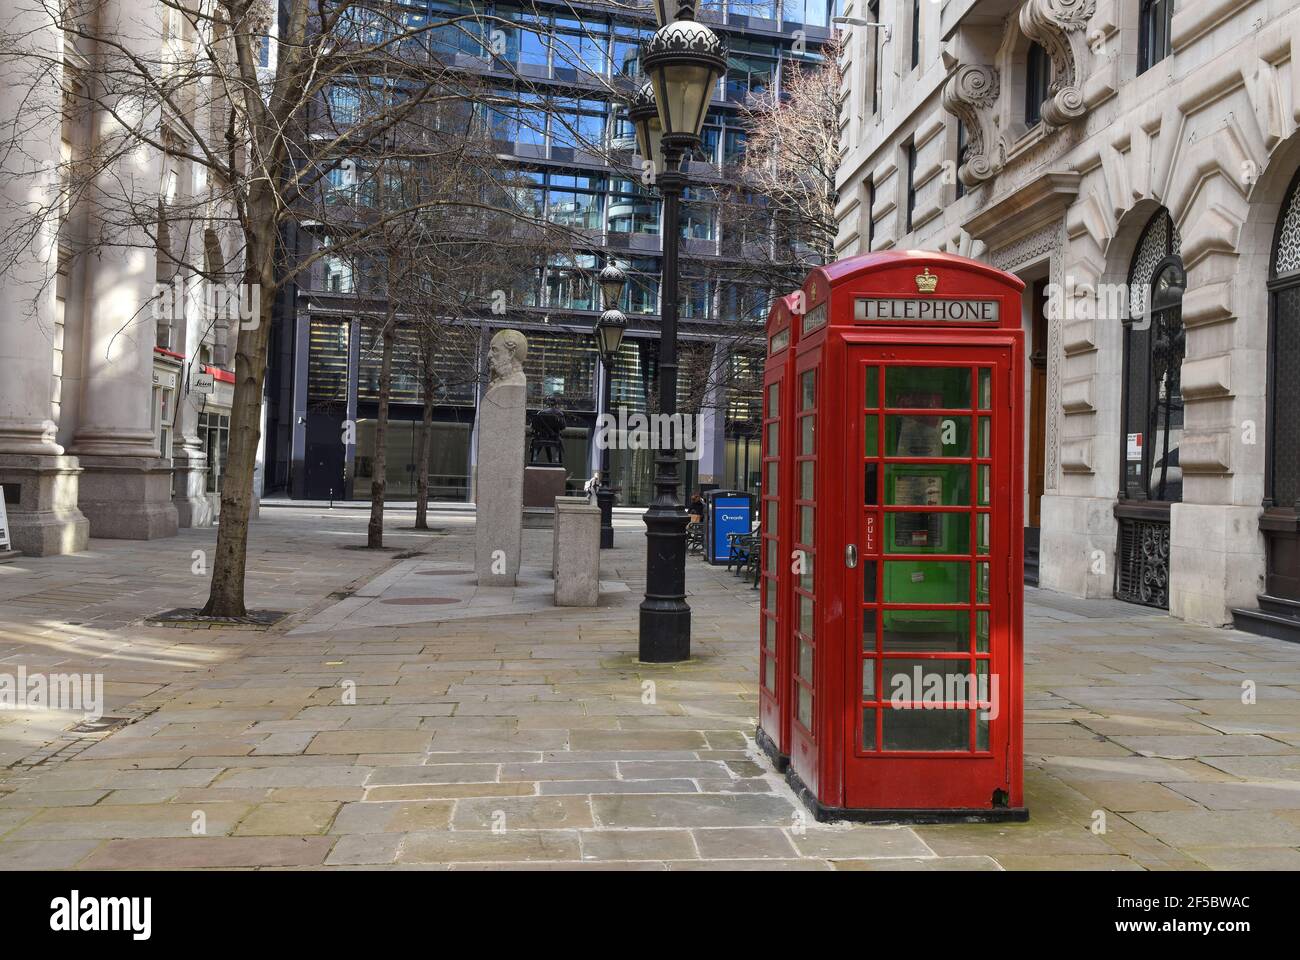 Typical London phone booths surrounded by an old London architecture, Royal Exchange, Cornhill Stock Photo